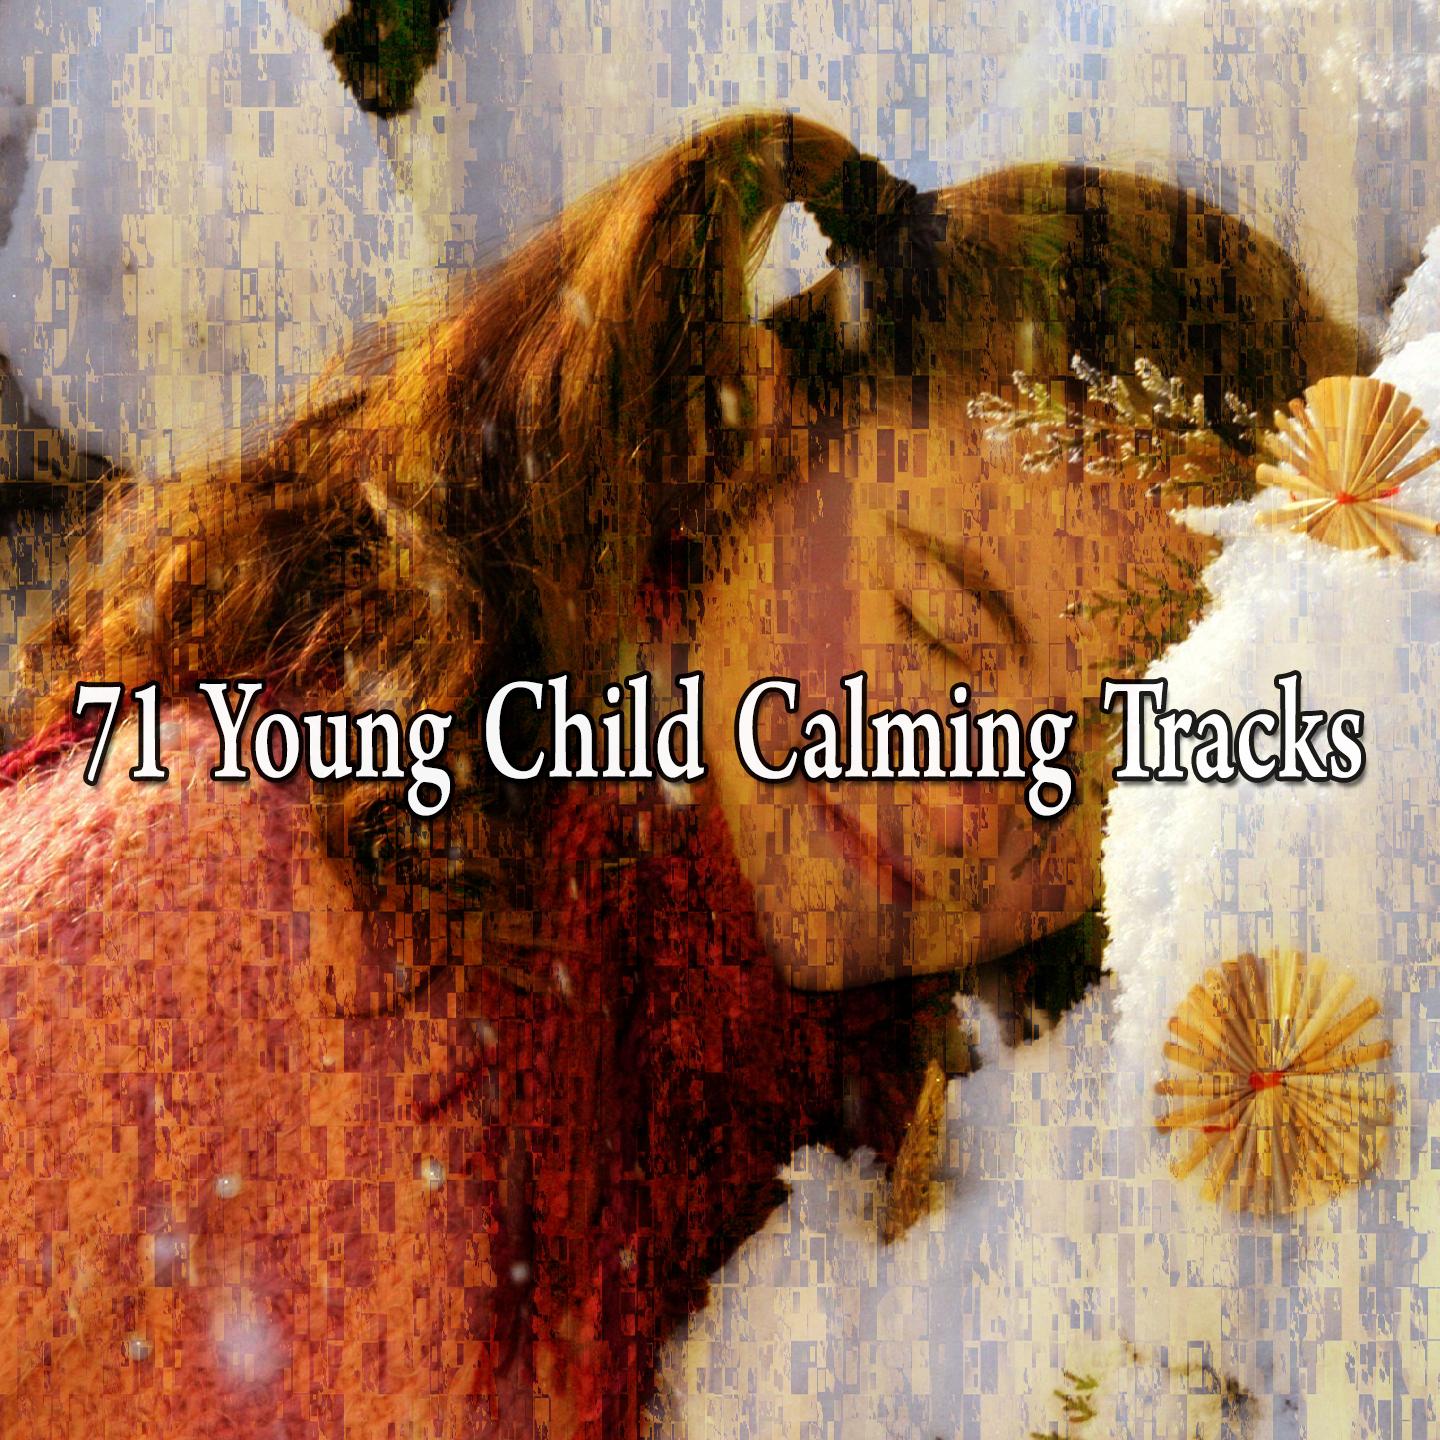 71 Young Child Calming Tracks